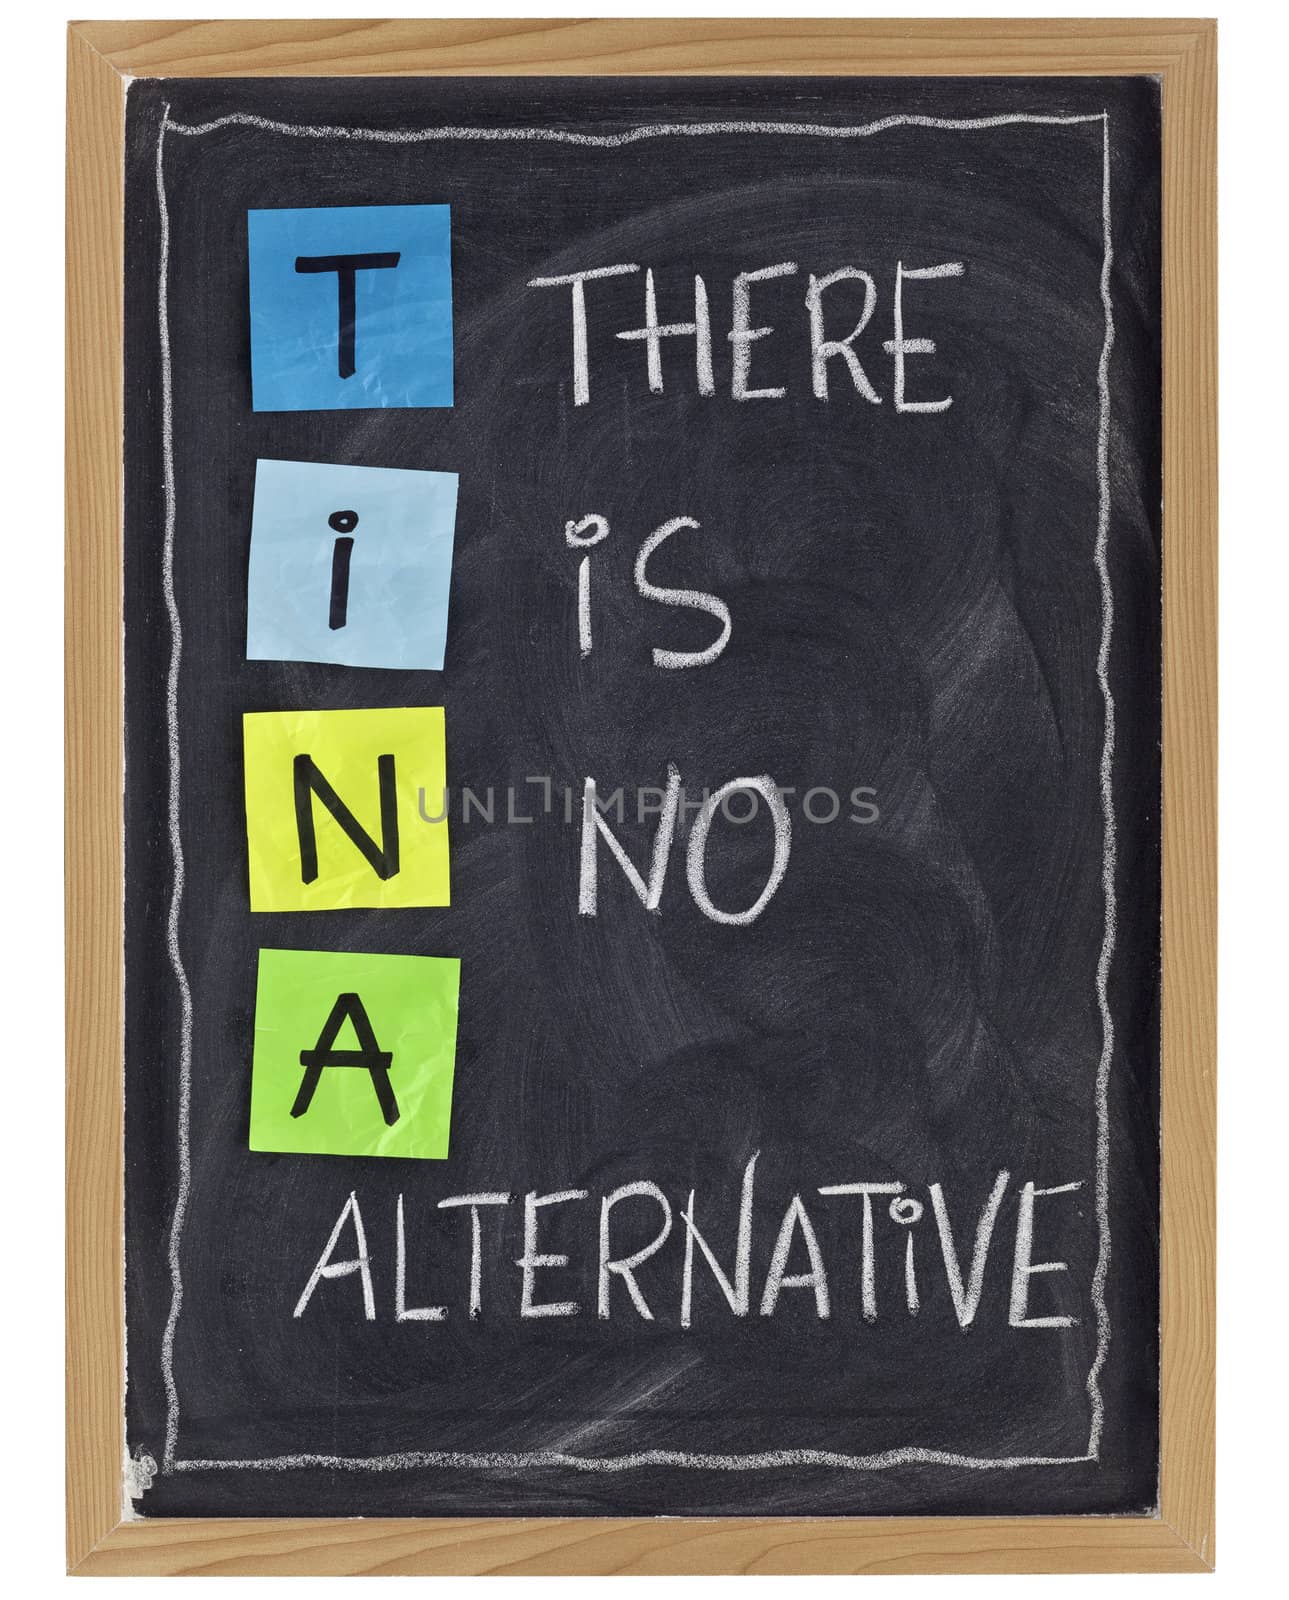 TINA (there is no alternative) - phrase attributed to Margaret Thatcher - white chalk handwriting and color sticky notes on blackboard,isolated on white